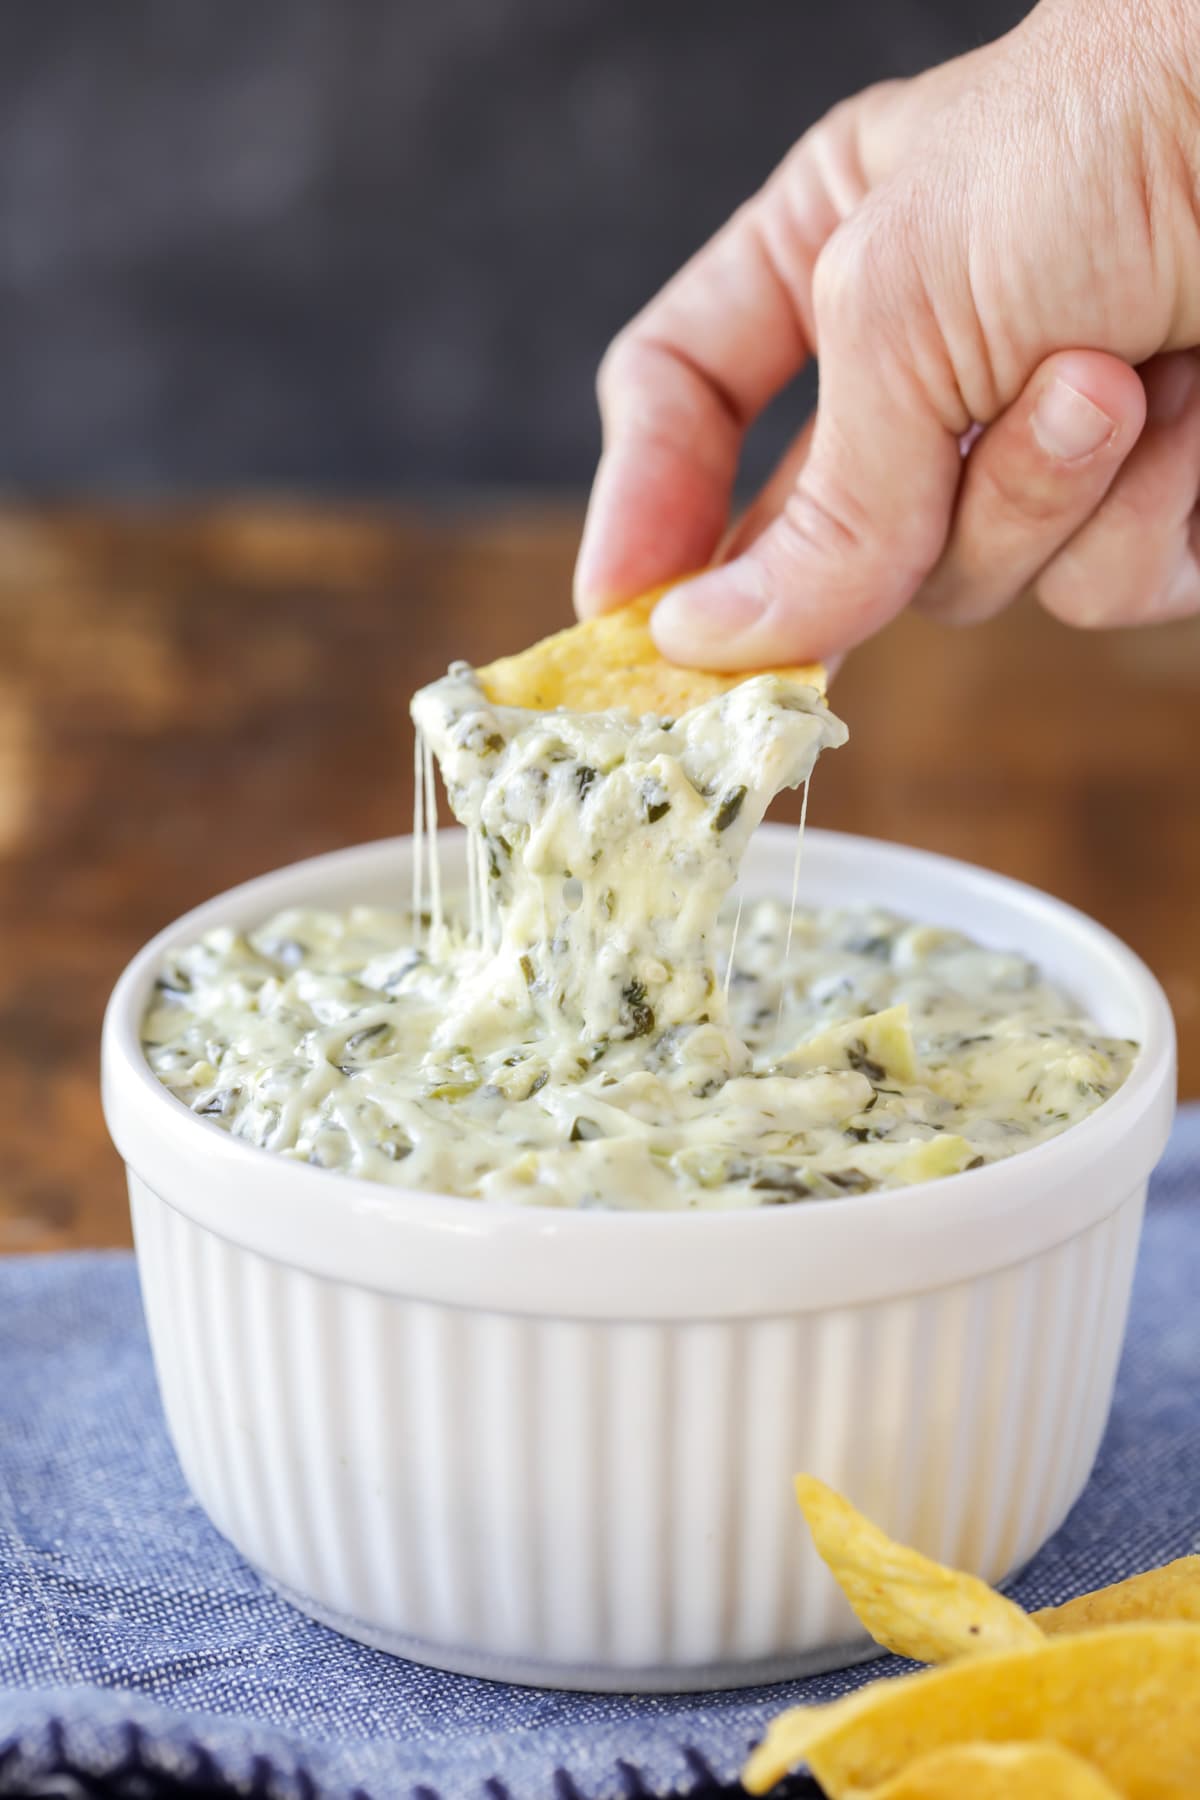 Dipping a chip into hot spinach artichoke dip.